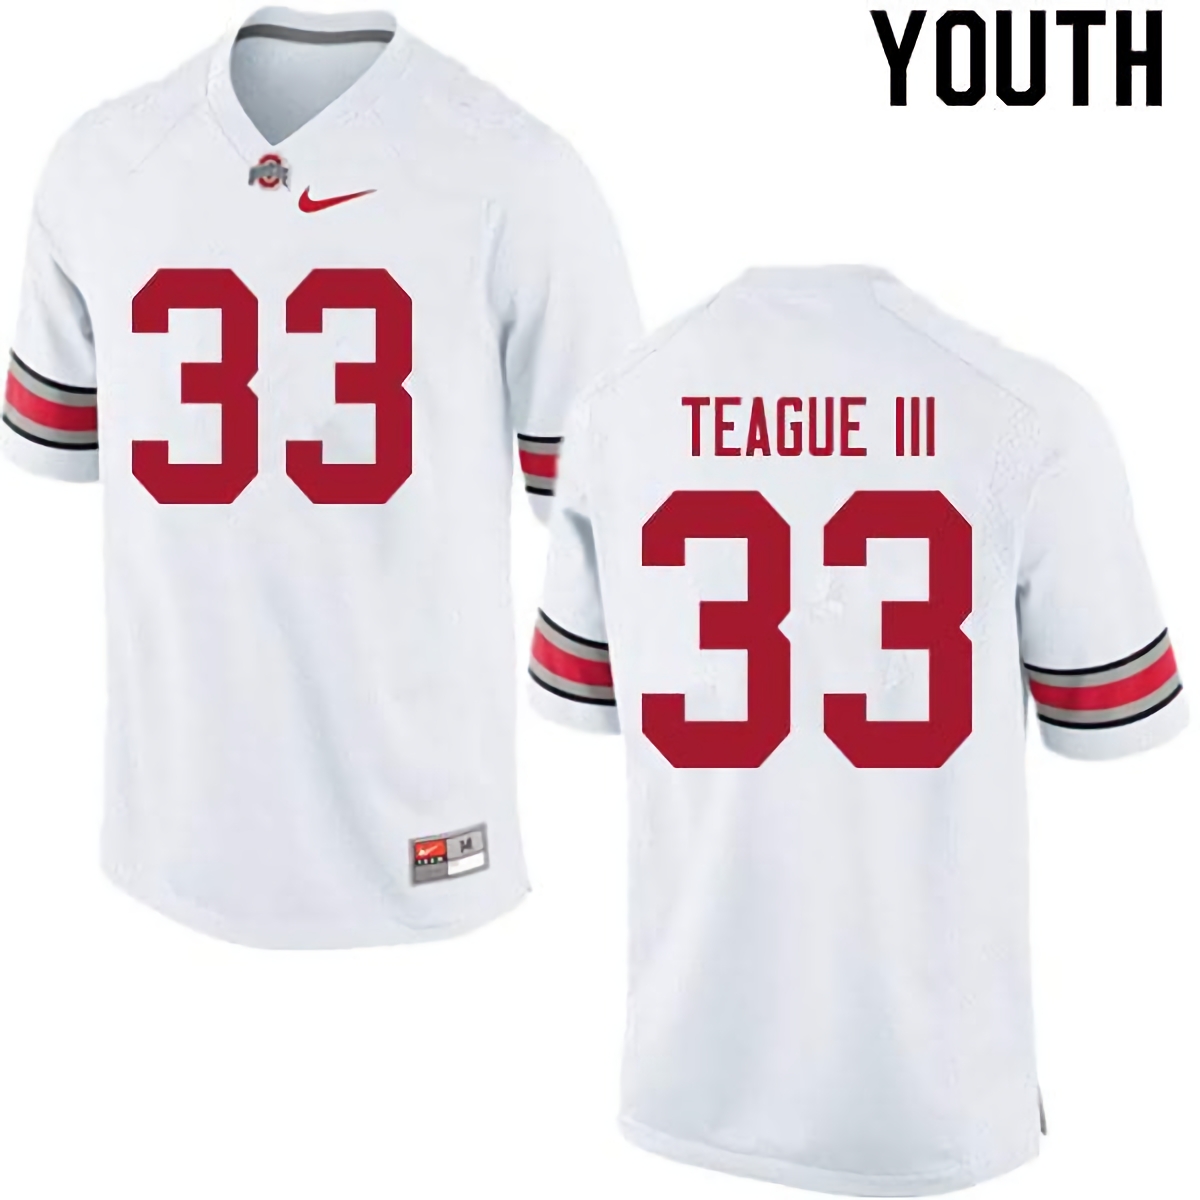 Master Teague III Ohio State Buckeyes Youth NCAA #33 Nike White College Stitched Football Jersey SNE5756FY